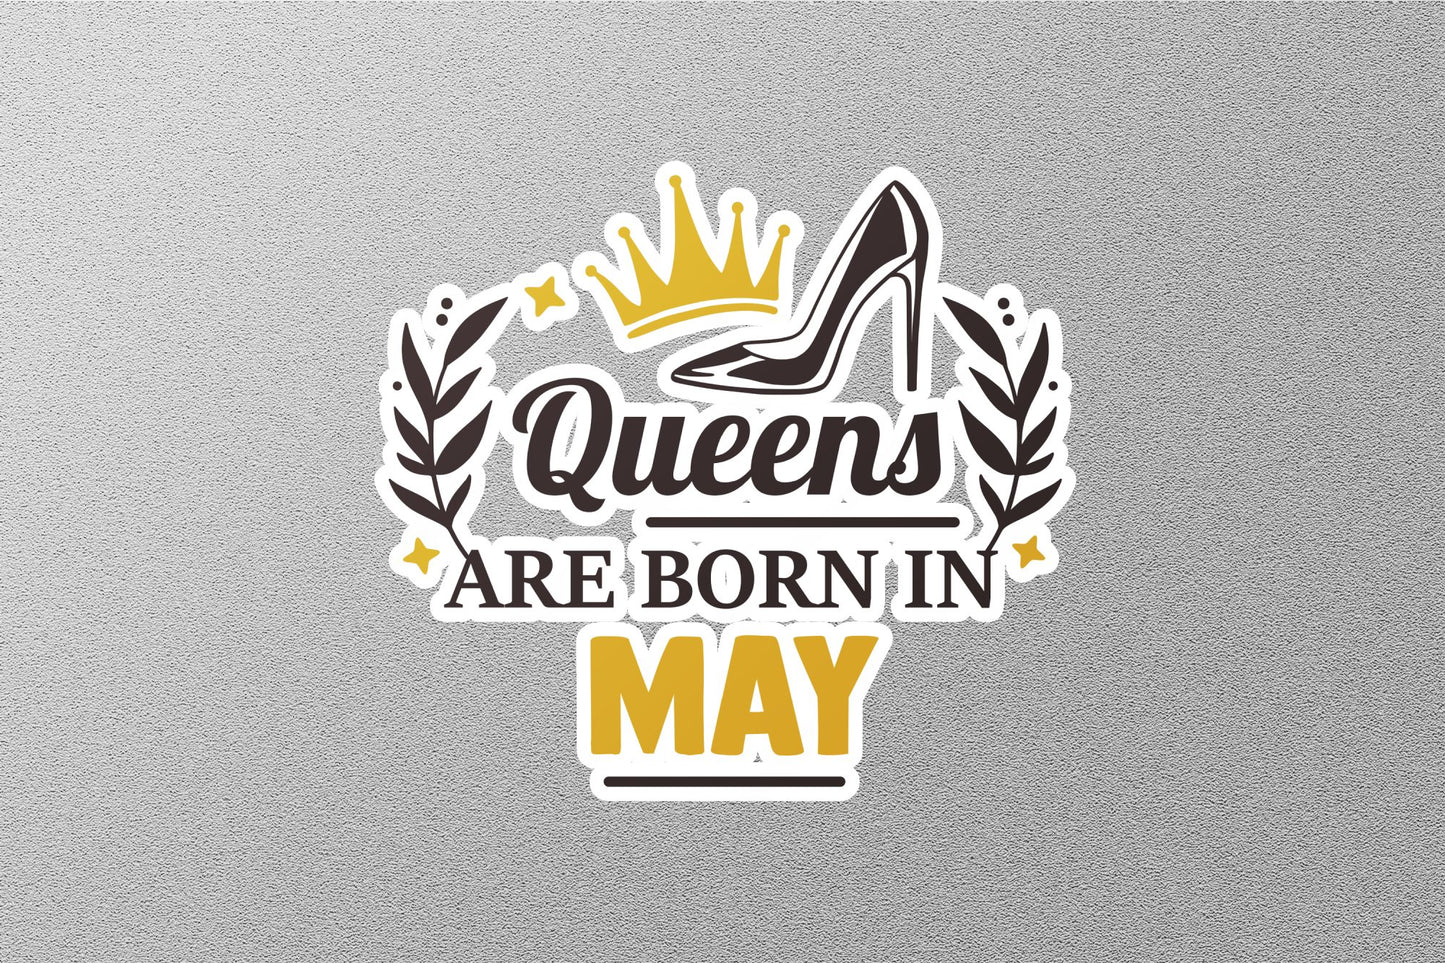 Queens Born In May Sticker